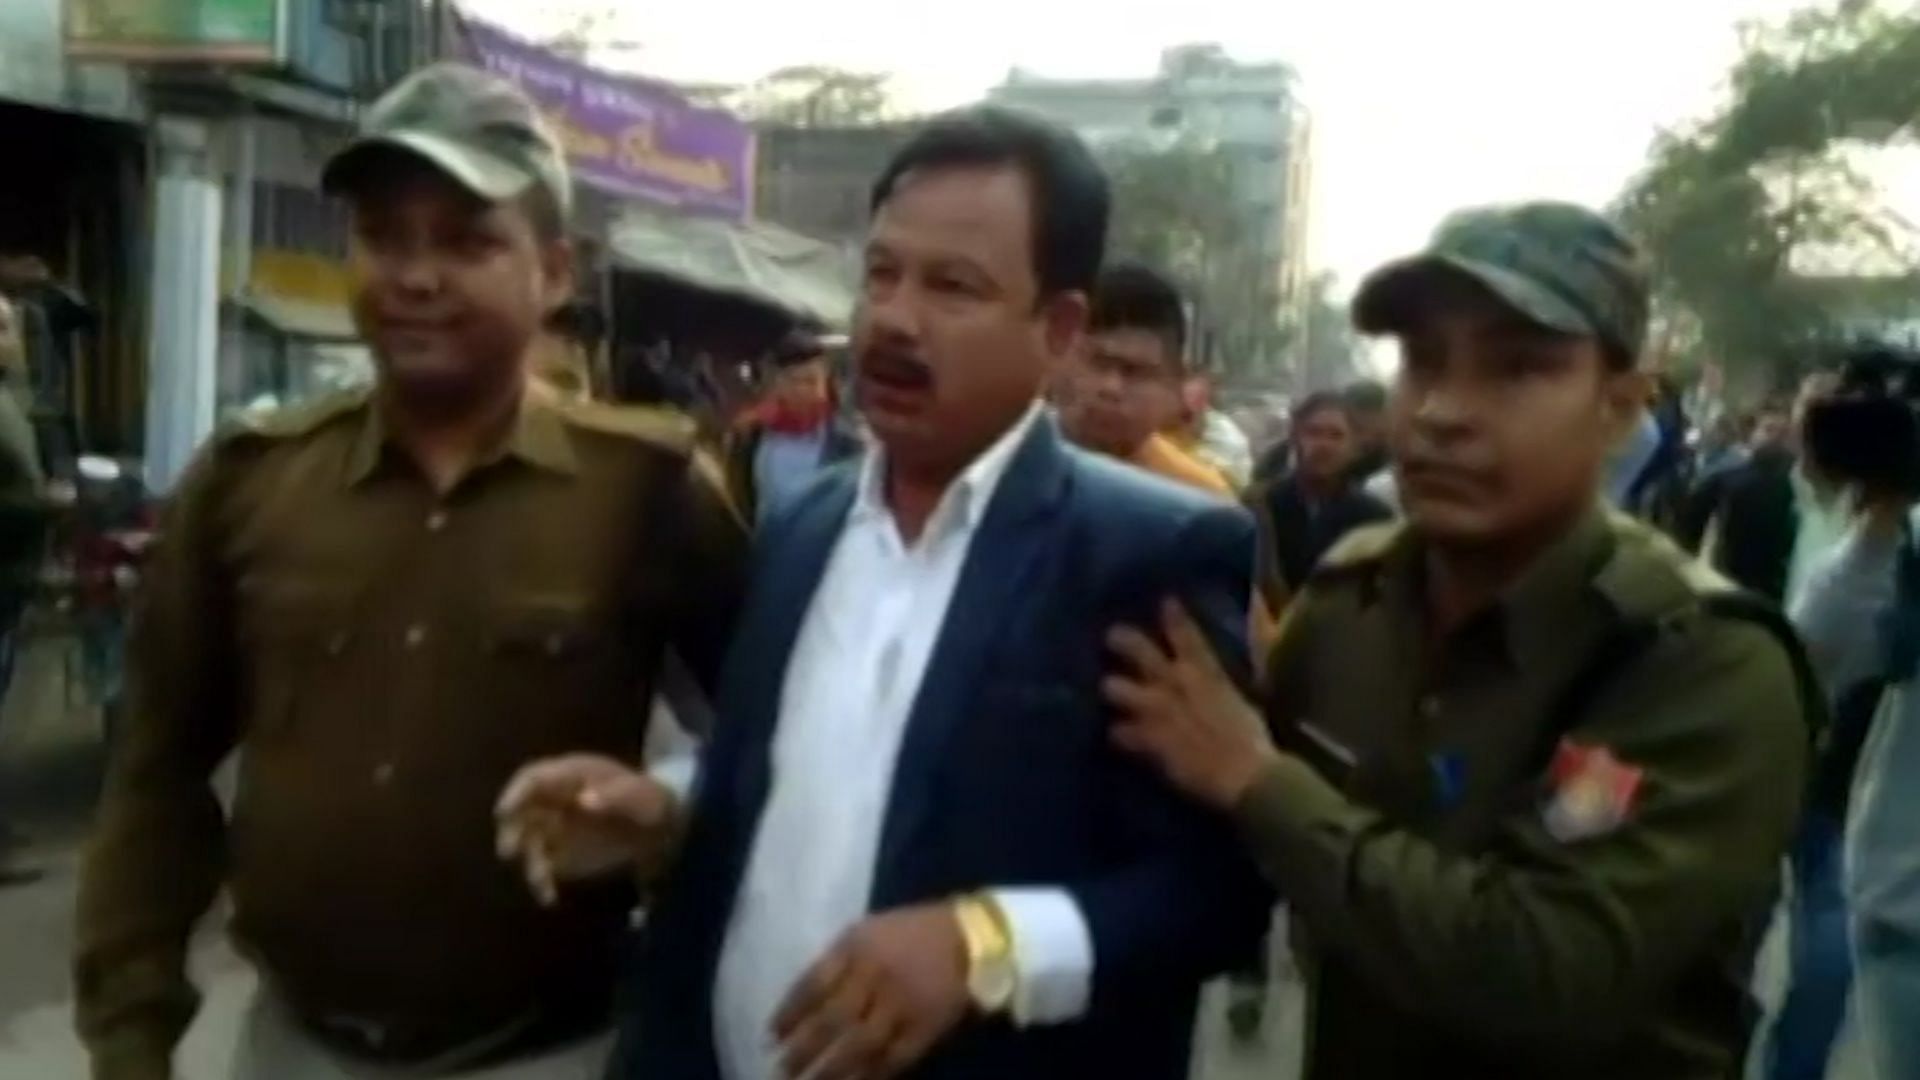 BJP’s Tinsukia district President Lakheswar Moran was beaten up by protesters over the Citizenship Bill.